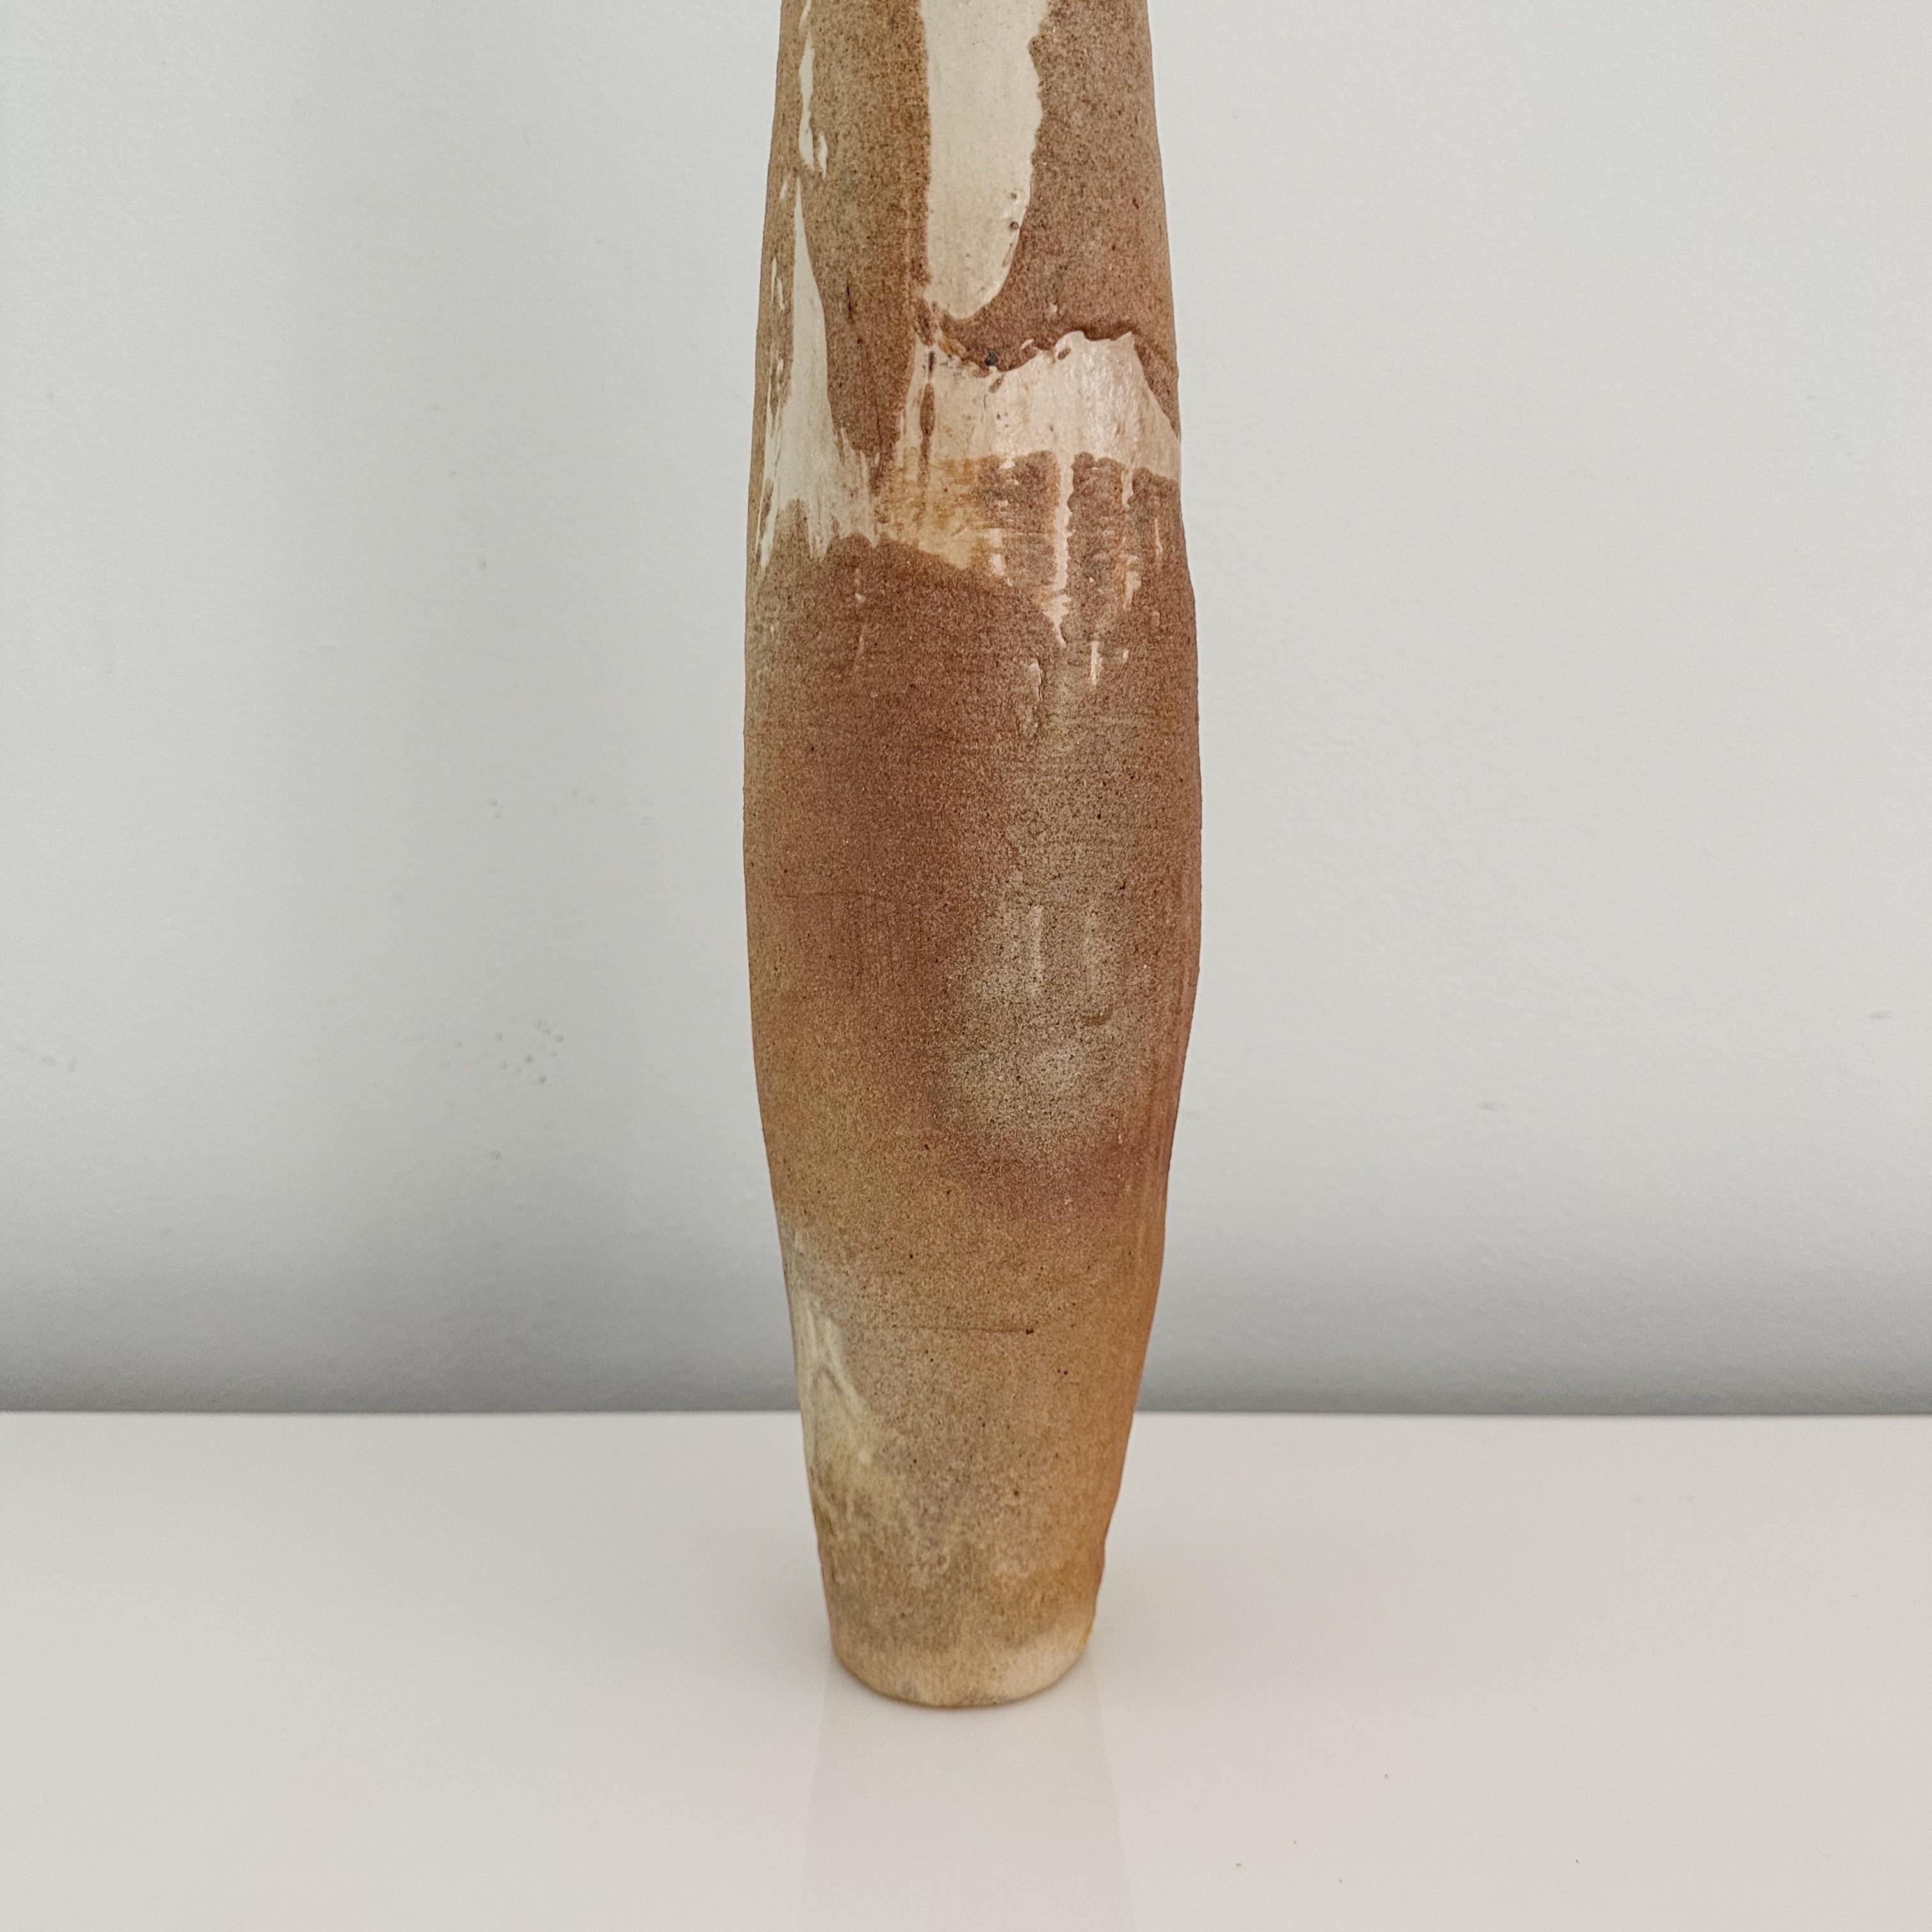 Unique Cylindrical Studio Pottery Vase, Tall and Lightweight, crafted in 1984, featuring Illegible Signature in Tans and Whites

Standing tall and boasting a lightweight design, this vase showcases a captivating interplay of tans and whites, with